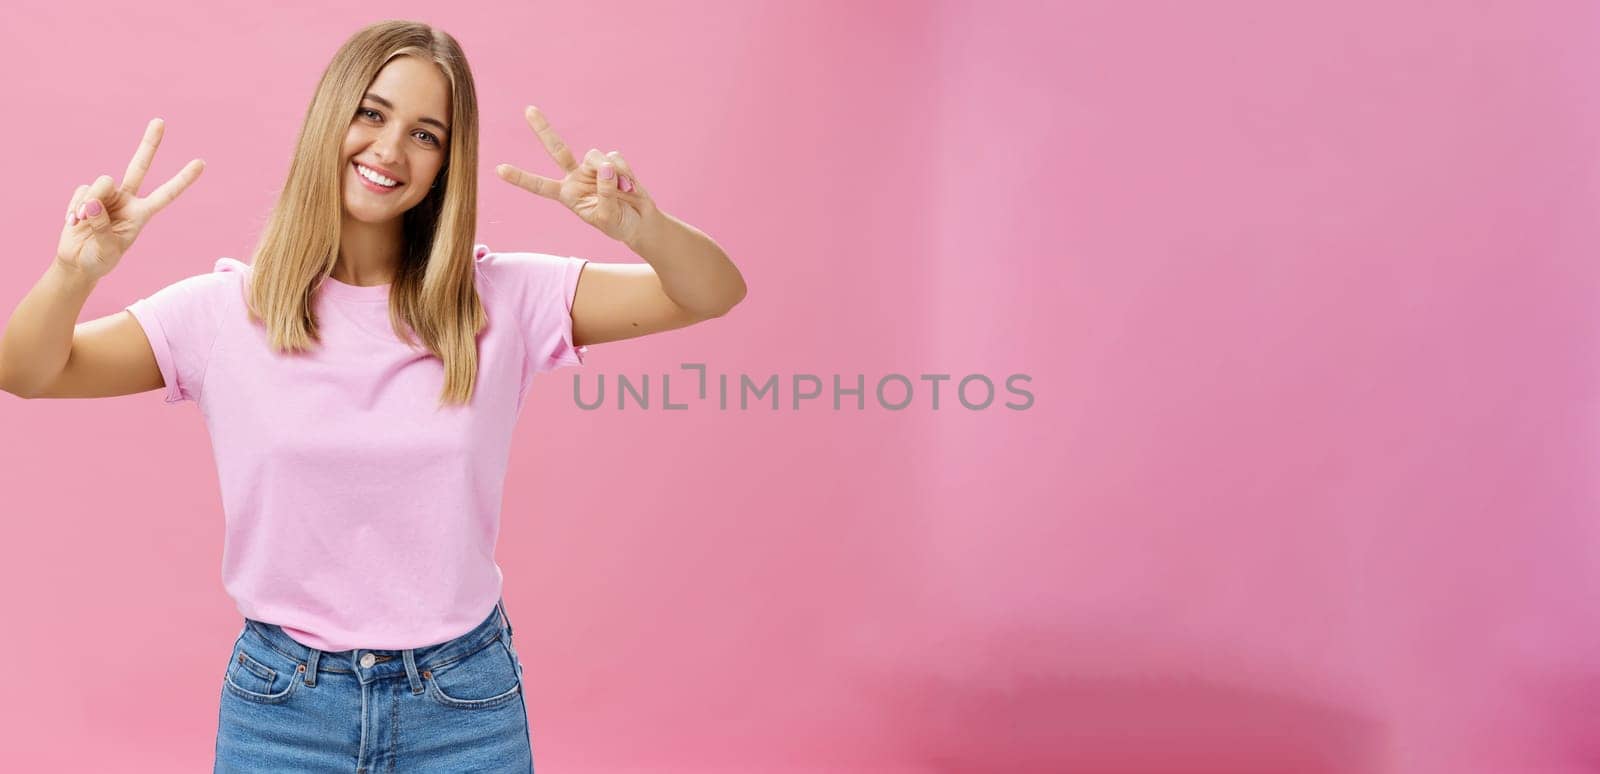 Cute chubby carefree young woman with short fair hair tilting head showing peace gestures with happy friendly smile having fun spending time amused and joyful against pink background. Copy space